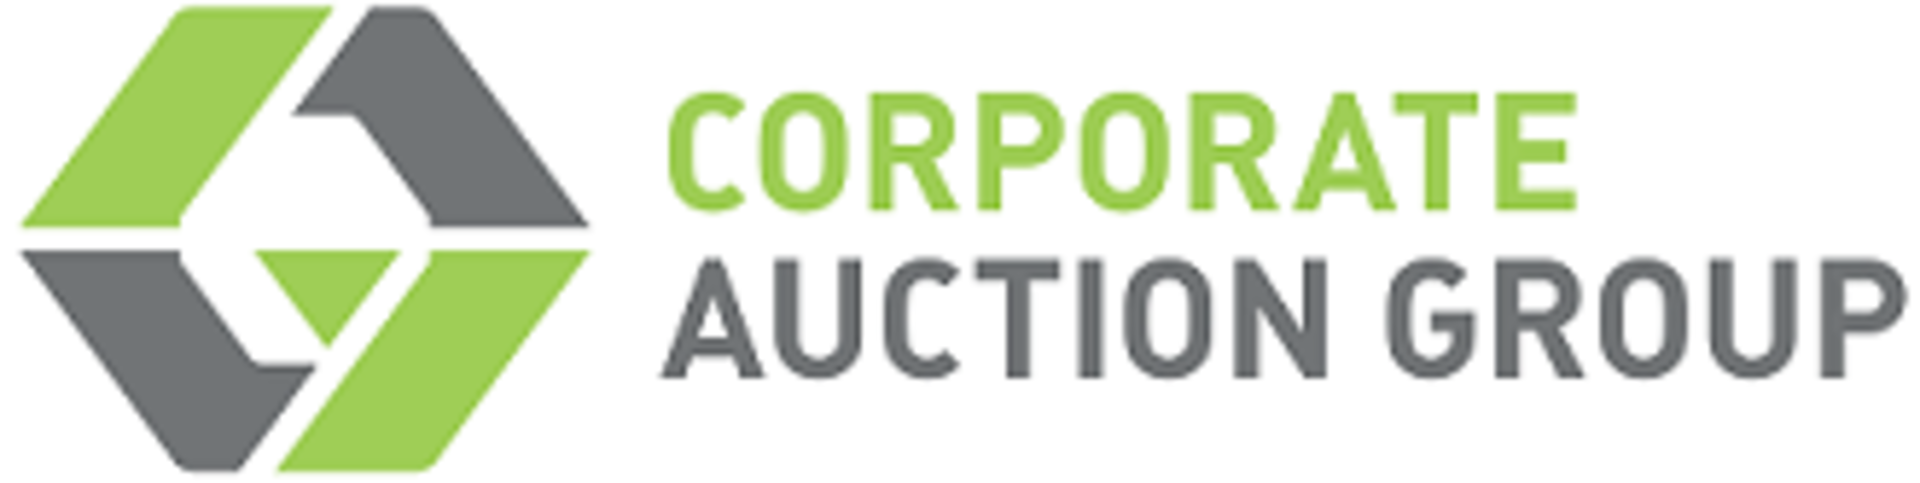 *NOT AN AUCTION LOT* Online auction of prepared food manufacturing and packaging equipment.